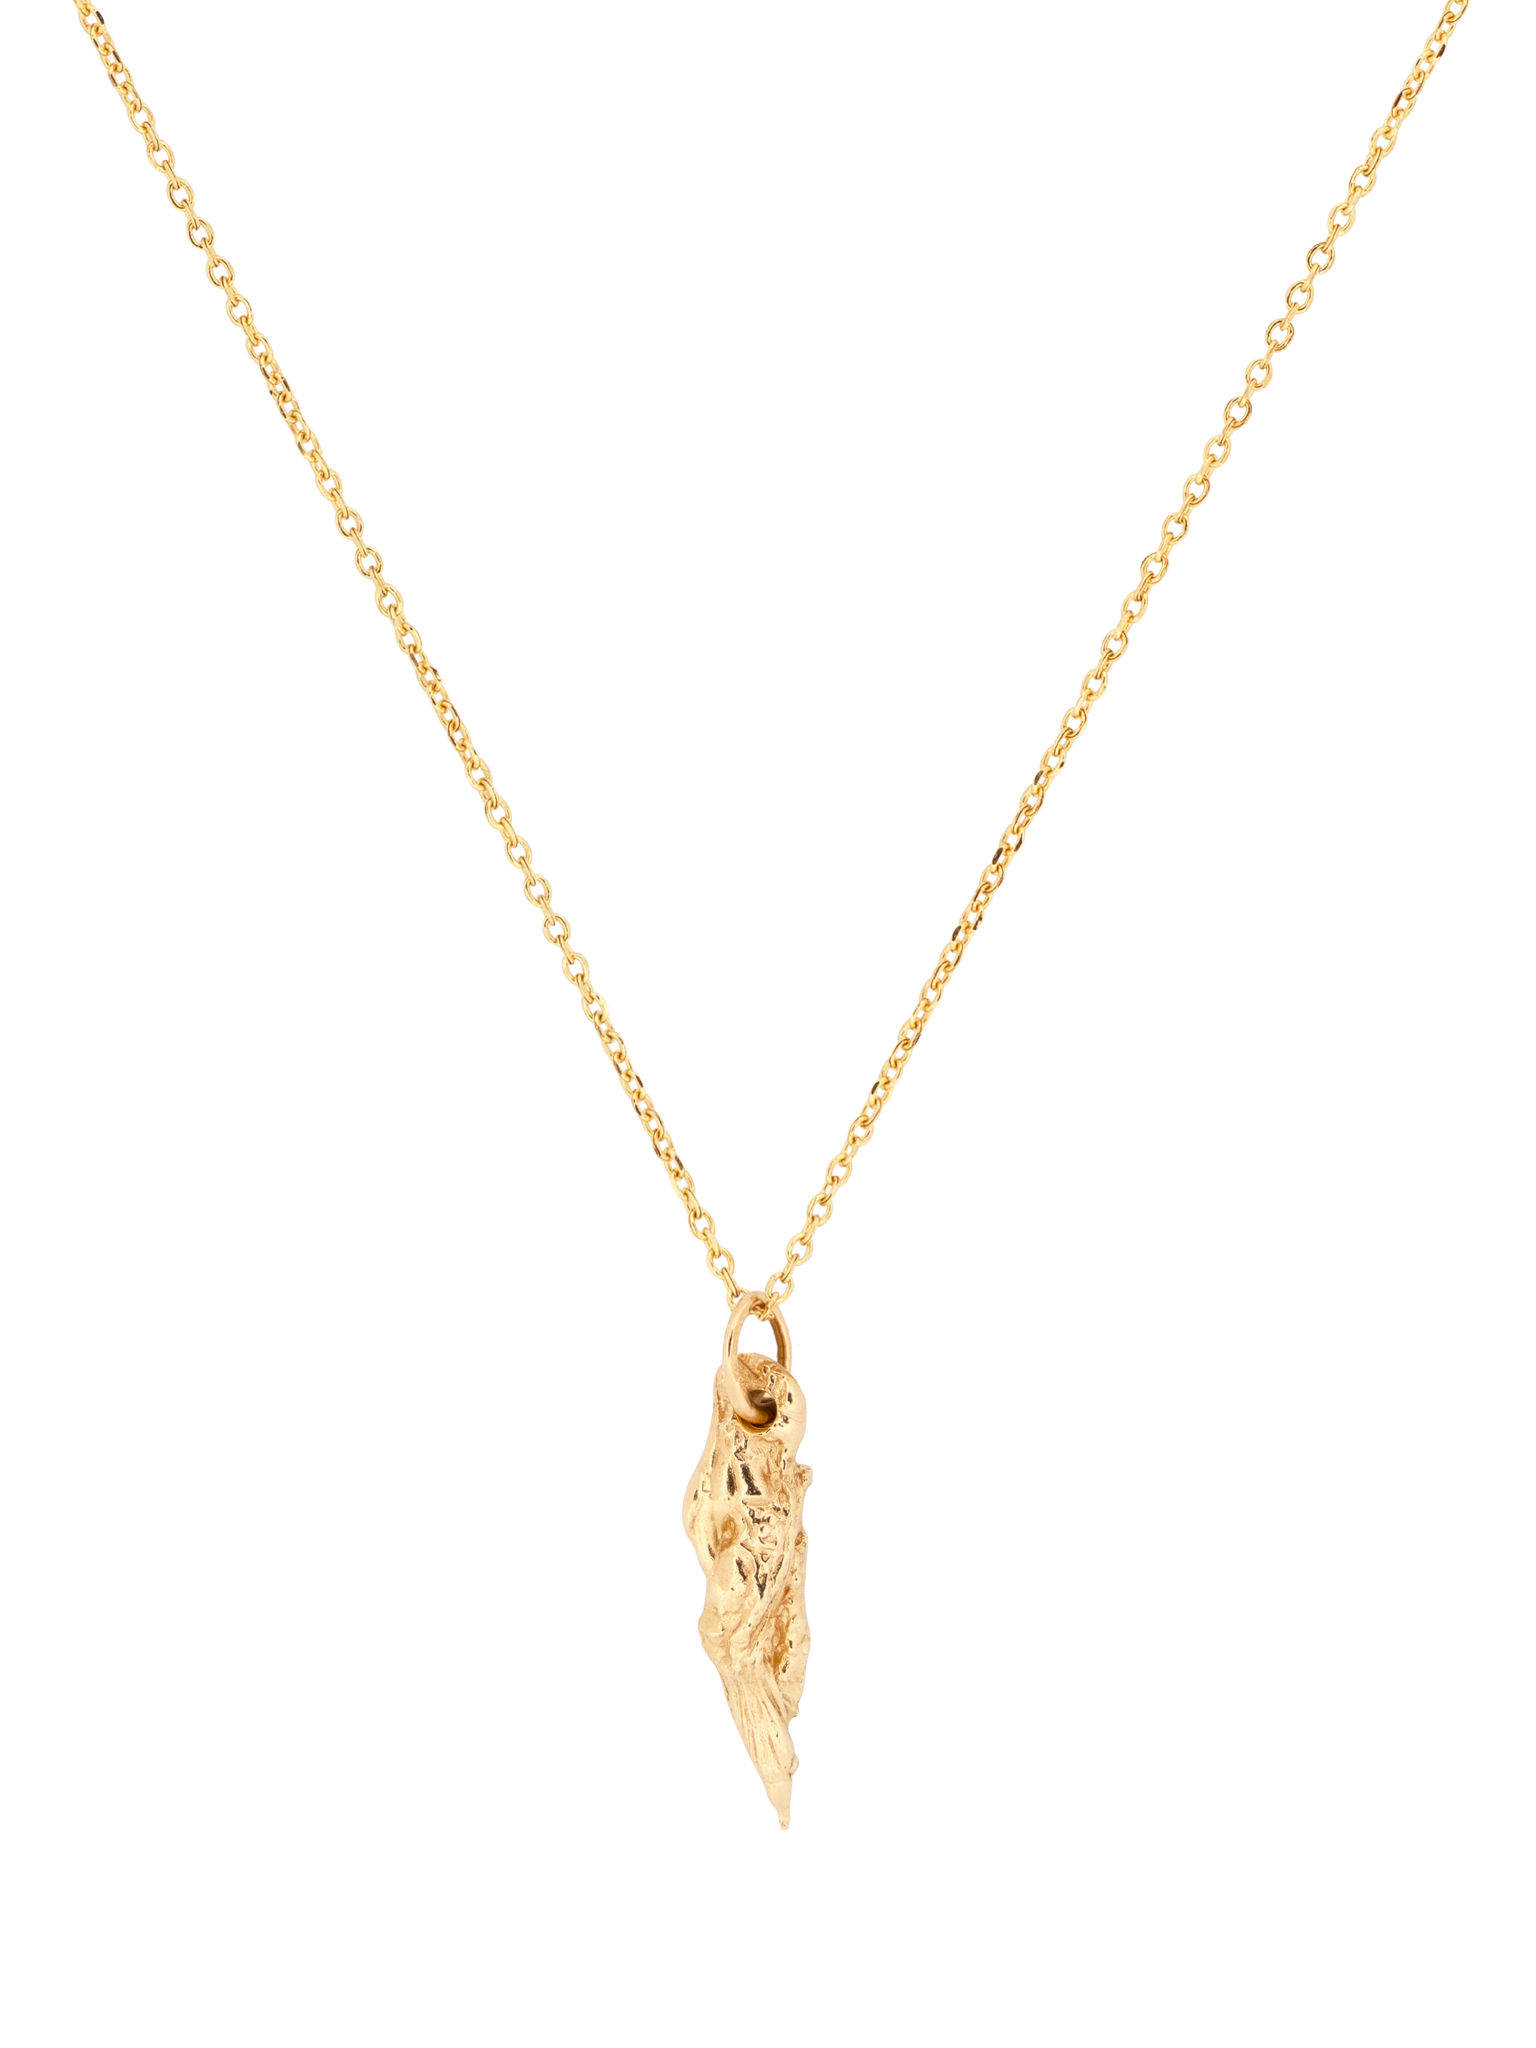 Shard gold pendant necklace III video